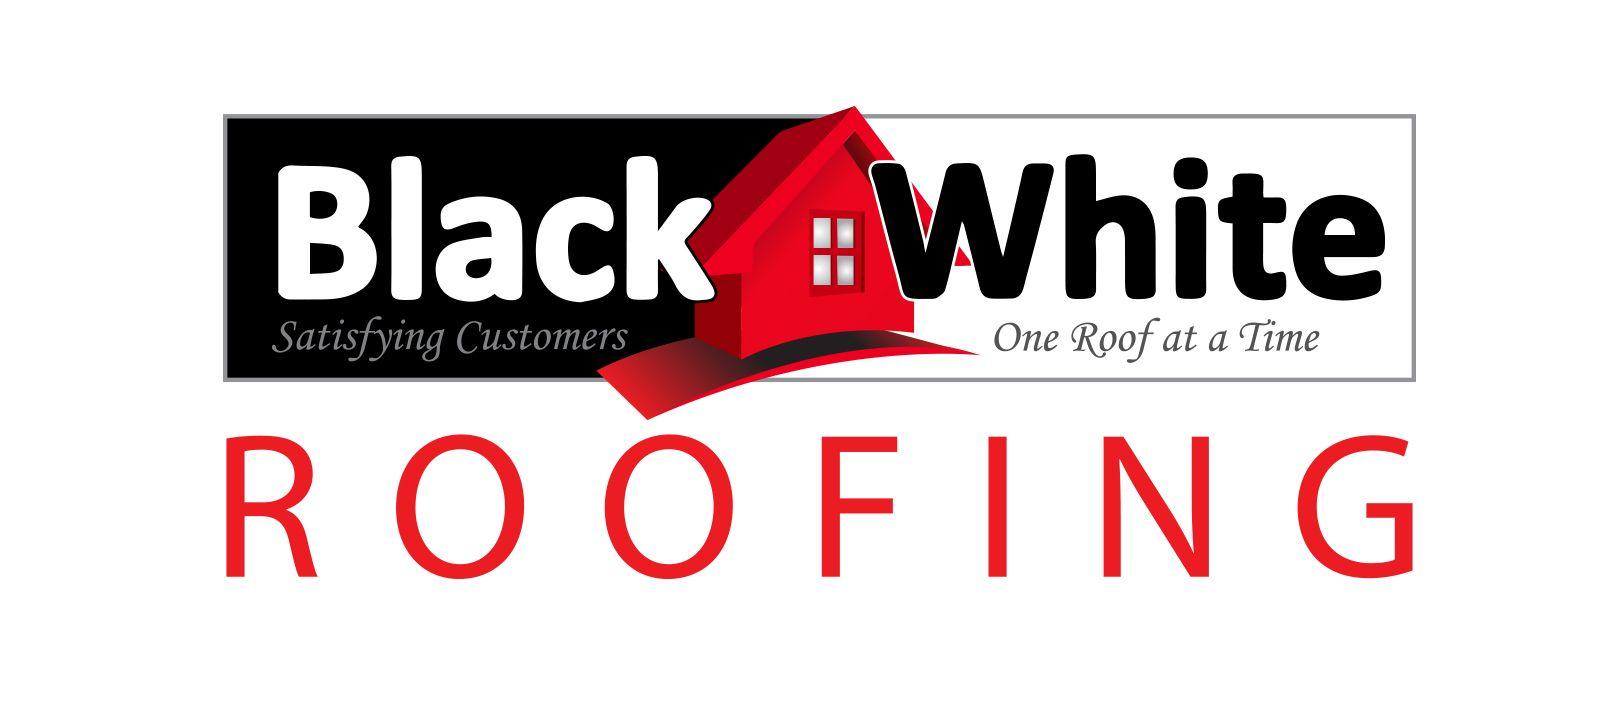 Black and Red Roof Logo - Black & White Roofing | Better Business Bureau® Profile